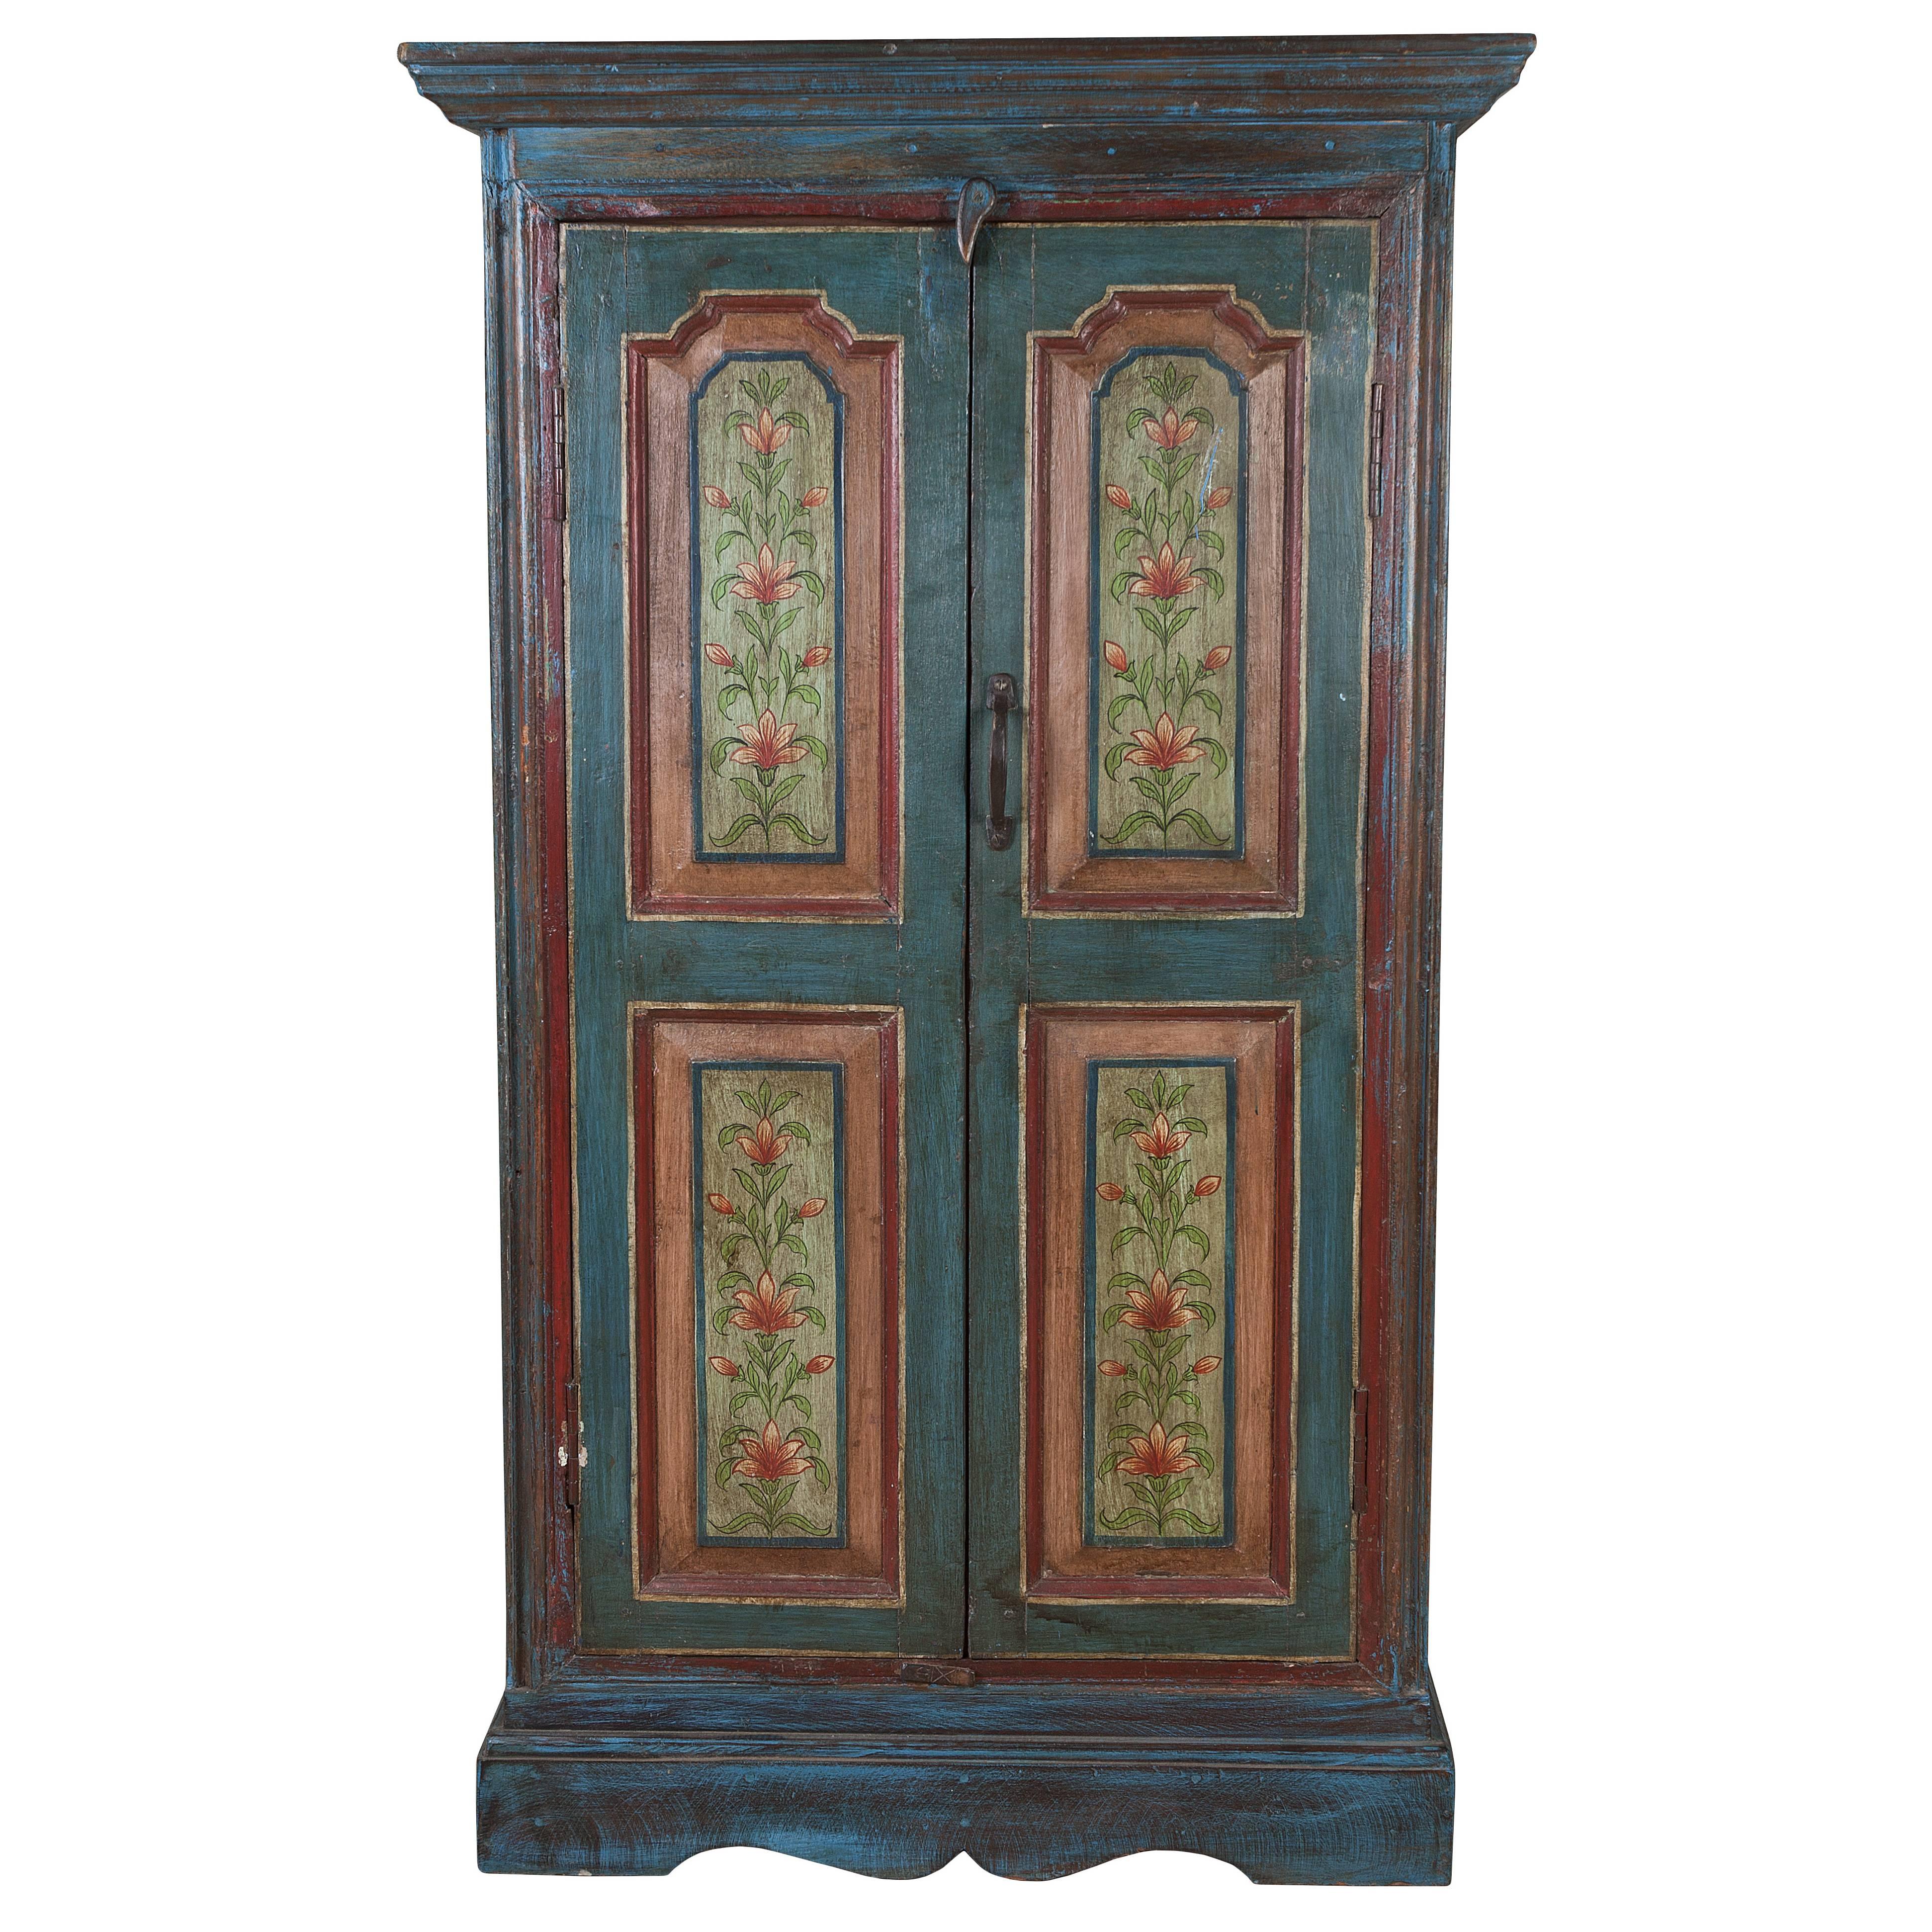 Lovely Early 1900s Hand-Painted Window Shutters Converted to Cabinet